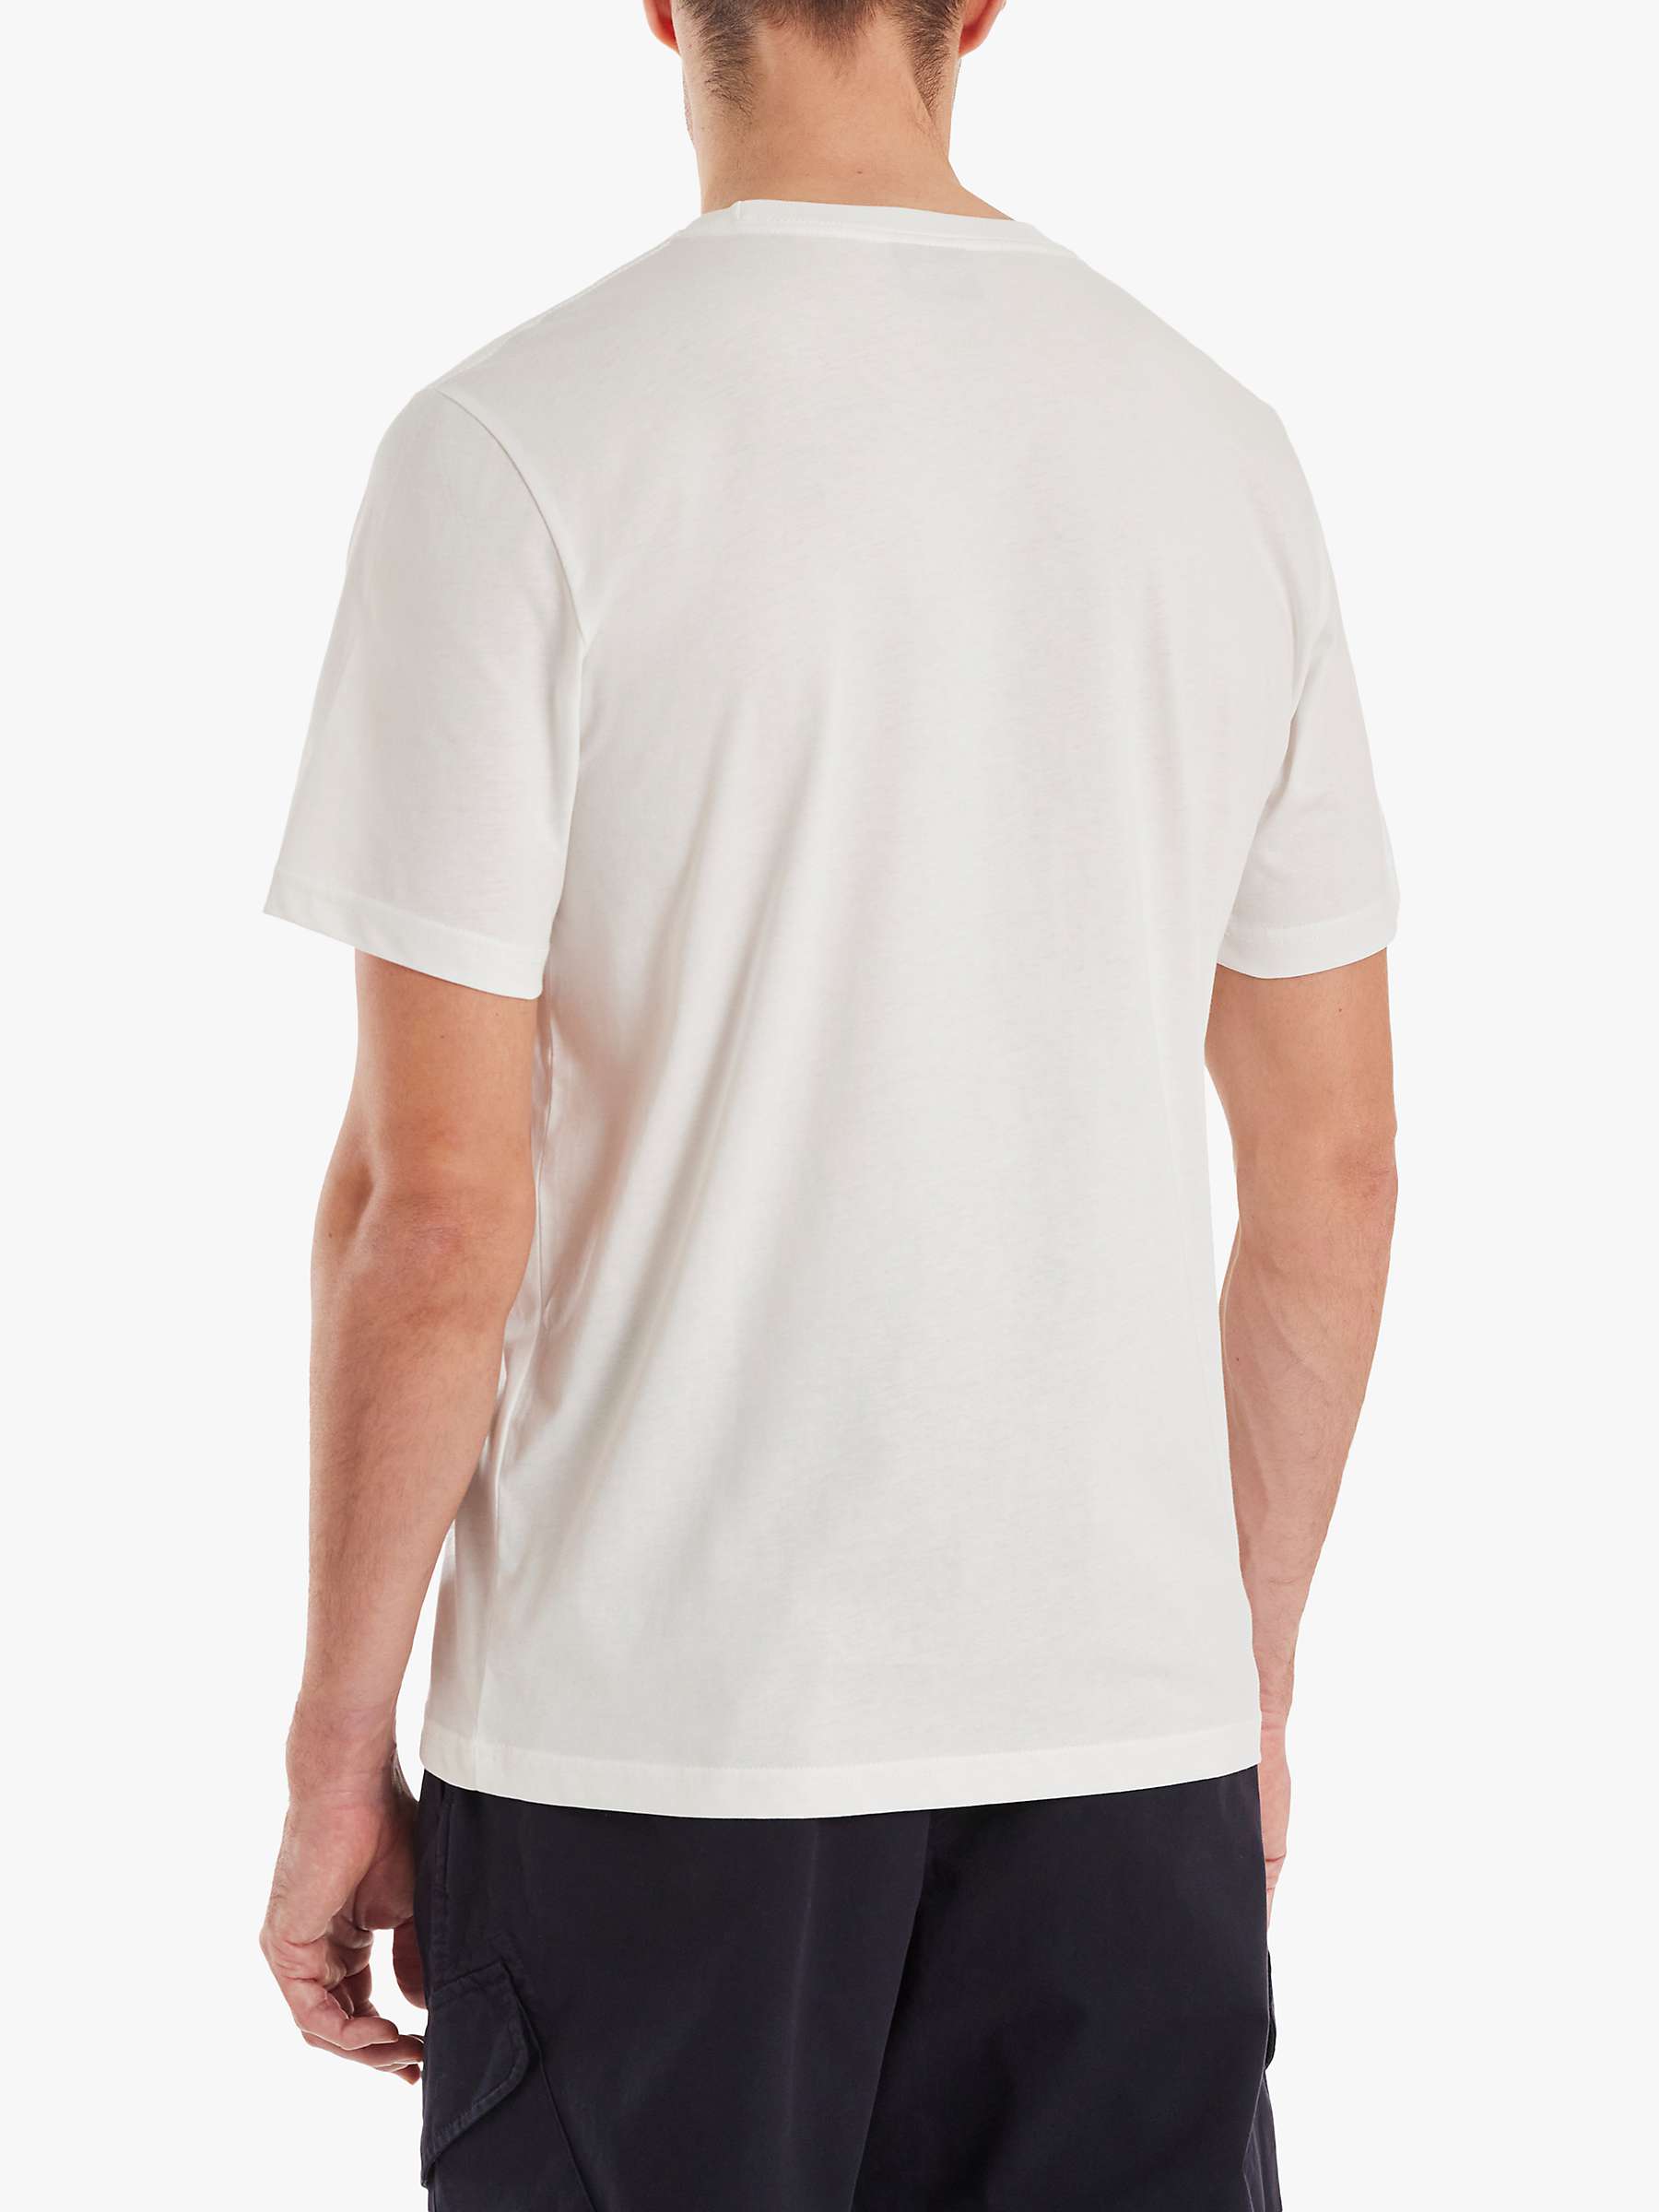 Buy PS Paul Smith Regular Cycle T-Shirt, White/Multi Online at johnlewis.com